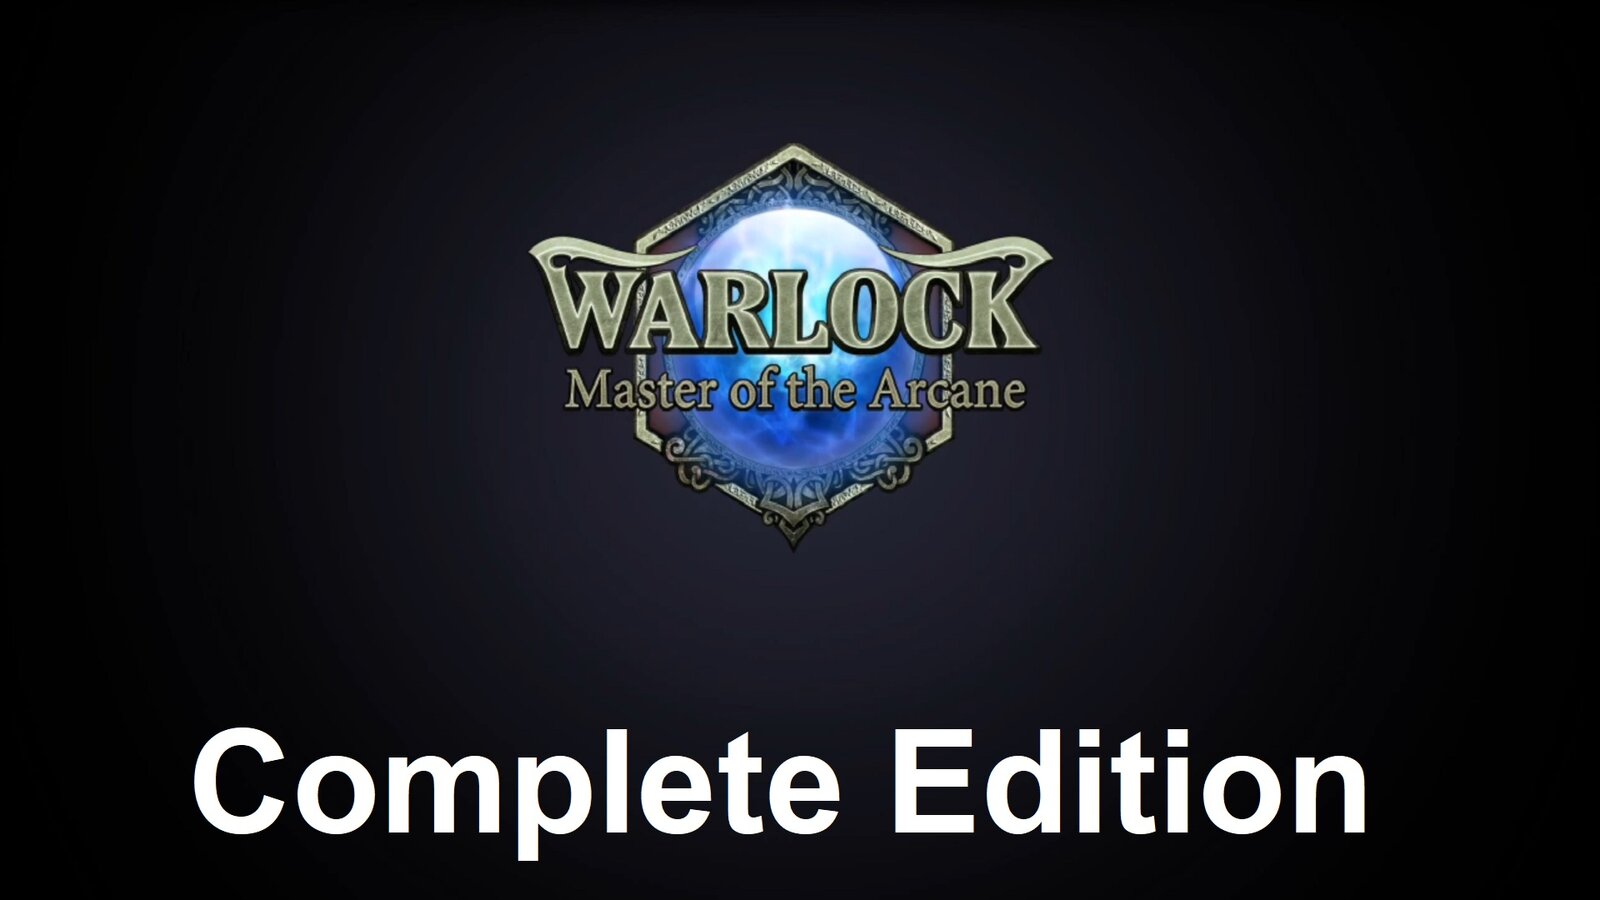 Warlock: Master of the Arcane - Complete Edition